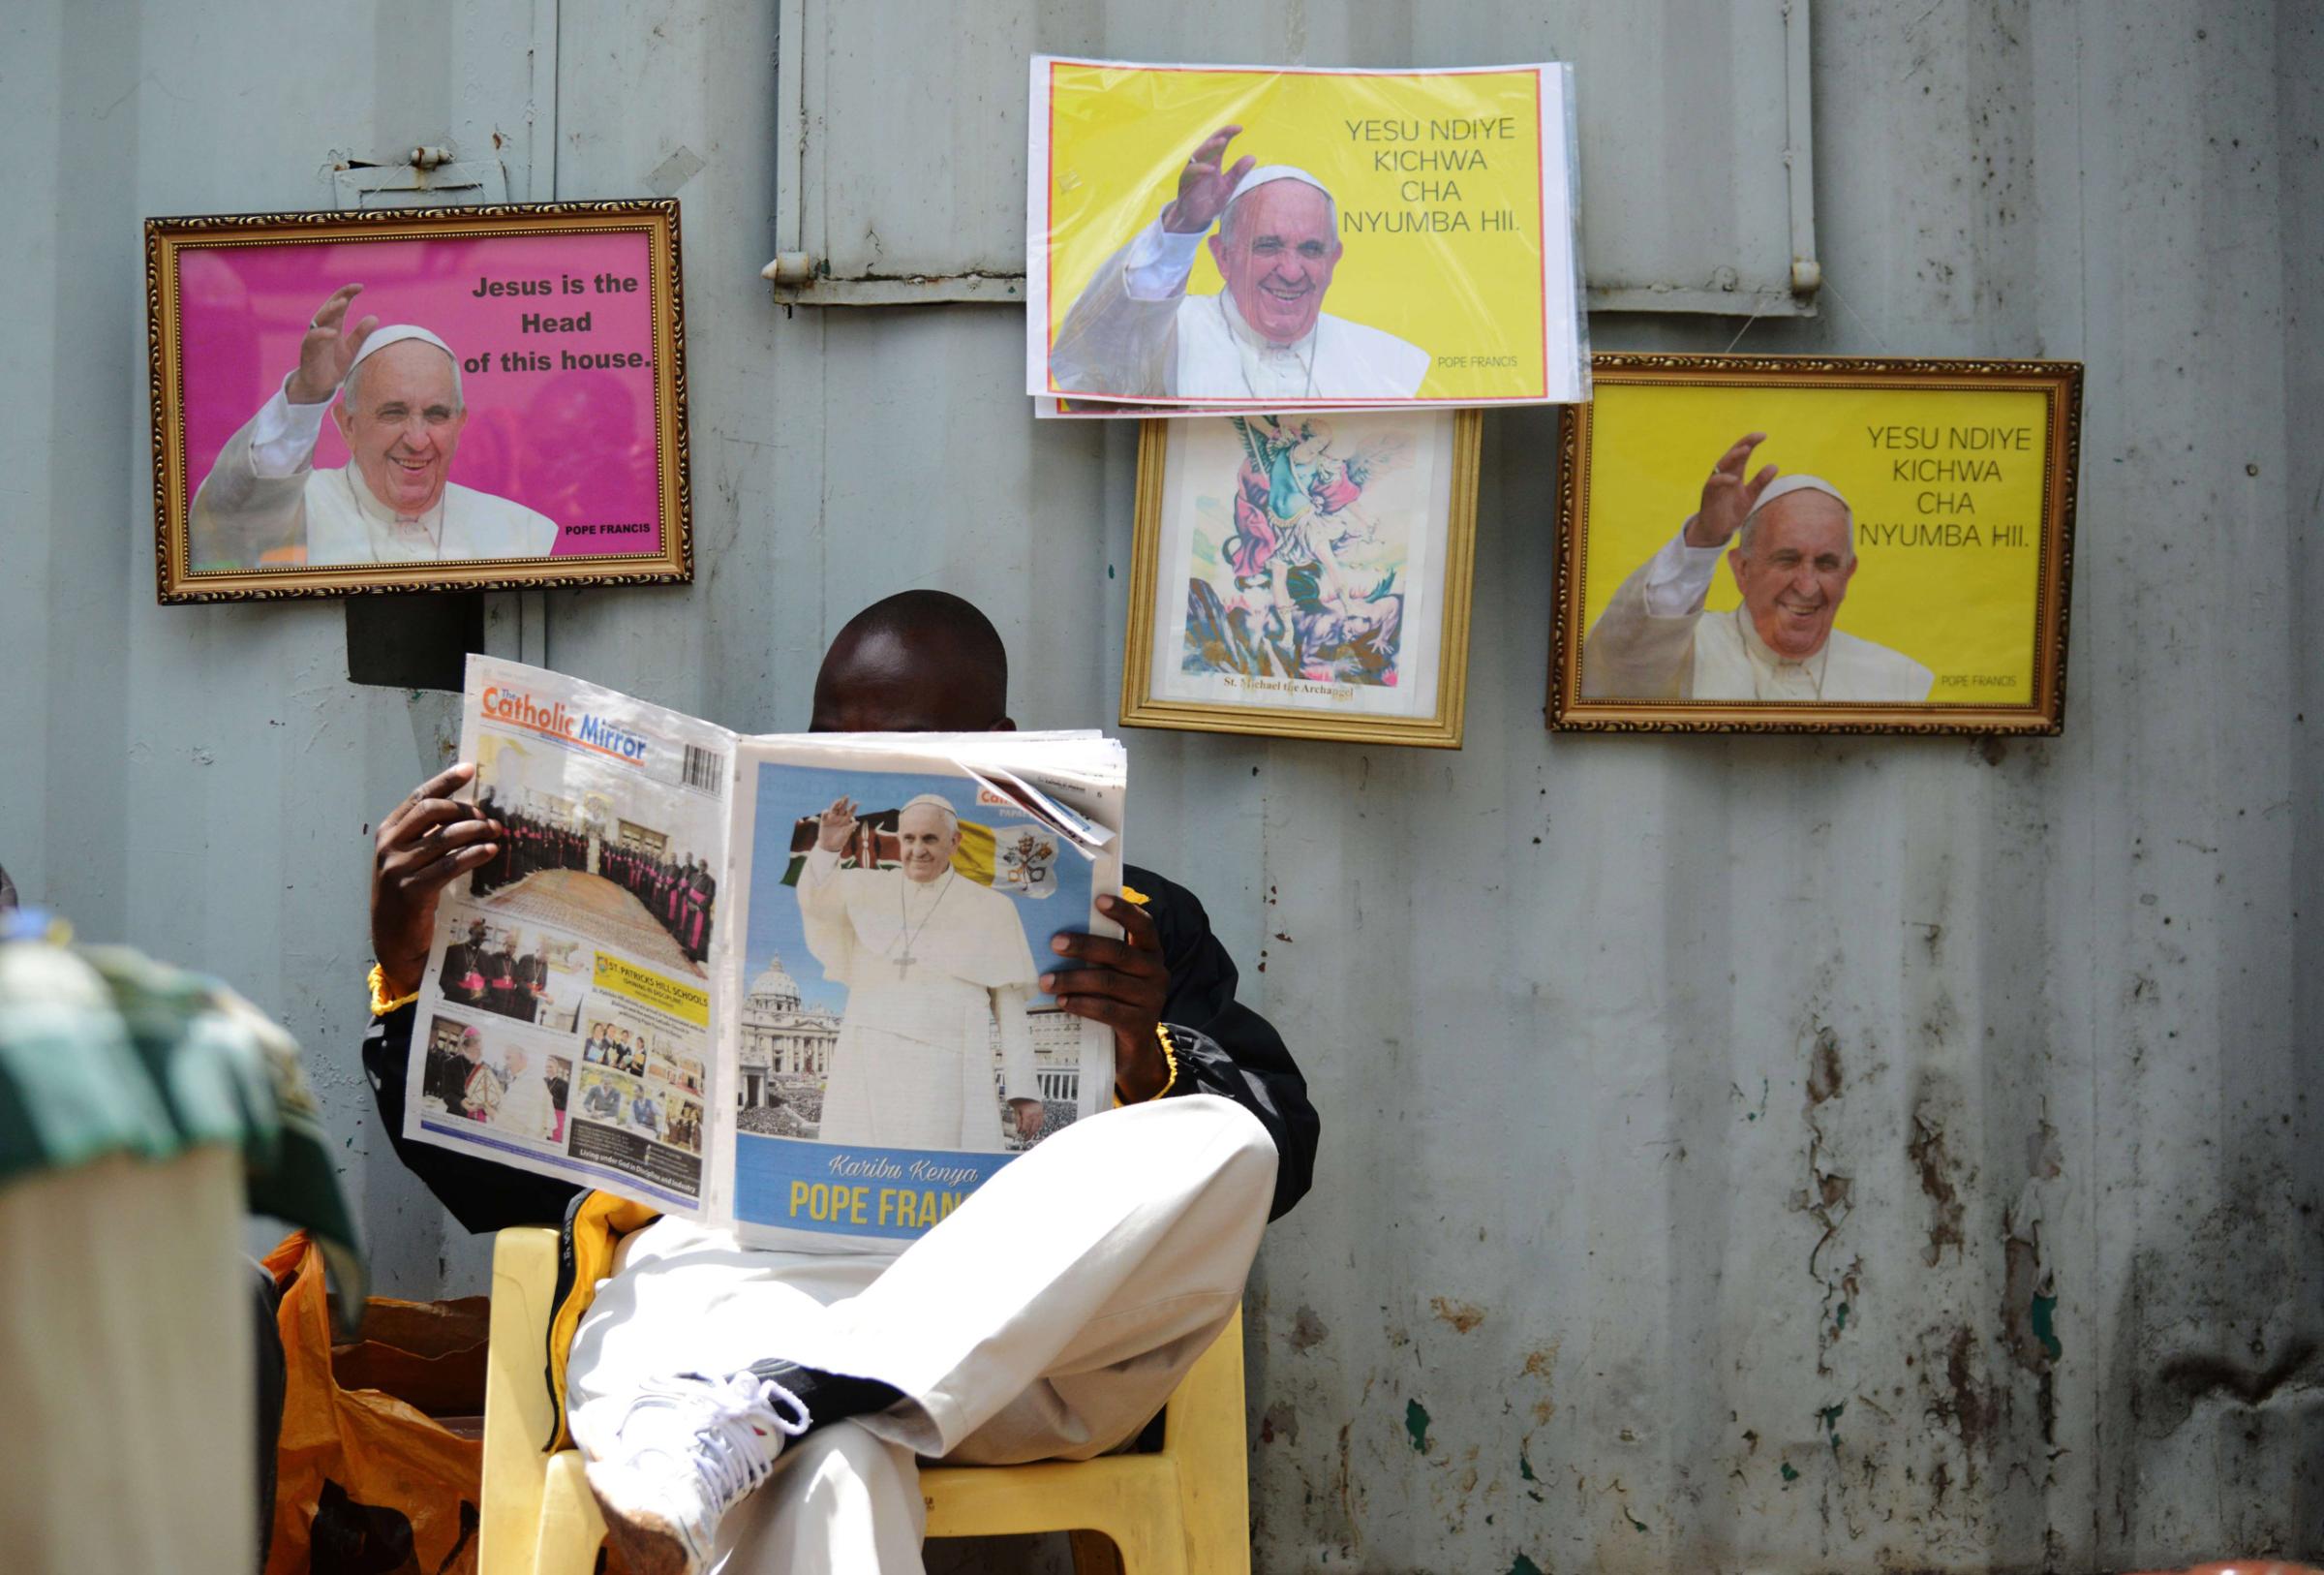 TOPSHOTS A man reads a copy of the "Catholic Mirror" newspaper next to pictures of Pope Francis at the Holy Family Basilica in Nairobi November 22, 2015. The Saint Joseph parish of the Kenyan capital Nairobi is expected to host a mass led by Pope Francis, who arrives in Kenya in two-days on a historic visit to East and Central Africa. Pope Francis heads to Africa this week for the riskiest trip of his papacy, defying danger with an open-topped popemobile and visits to a slum, refugee camp and mosque despite security fears following jihadist attacks. AFP PHOTO / TONY KARUMBASIMON MAINA/AFP/Getty Images